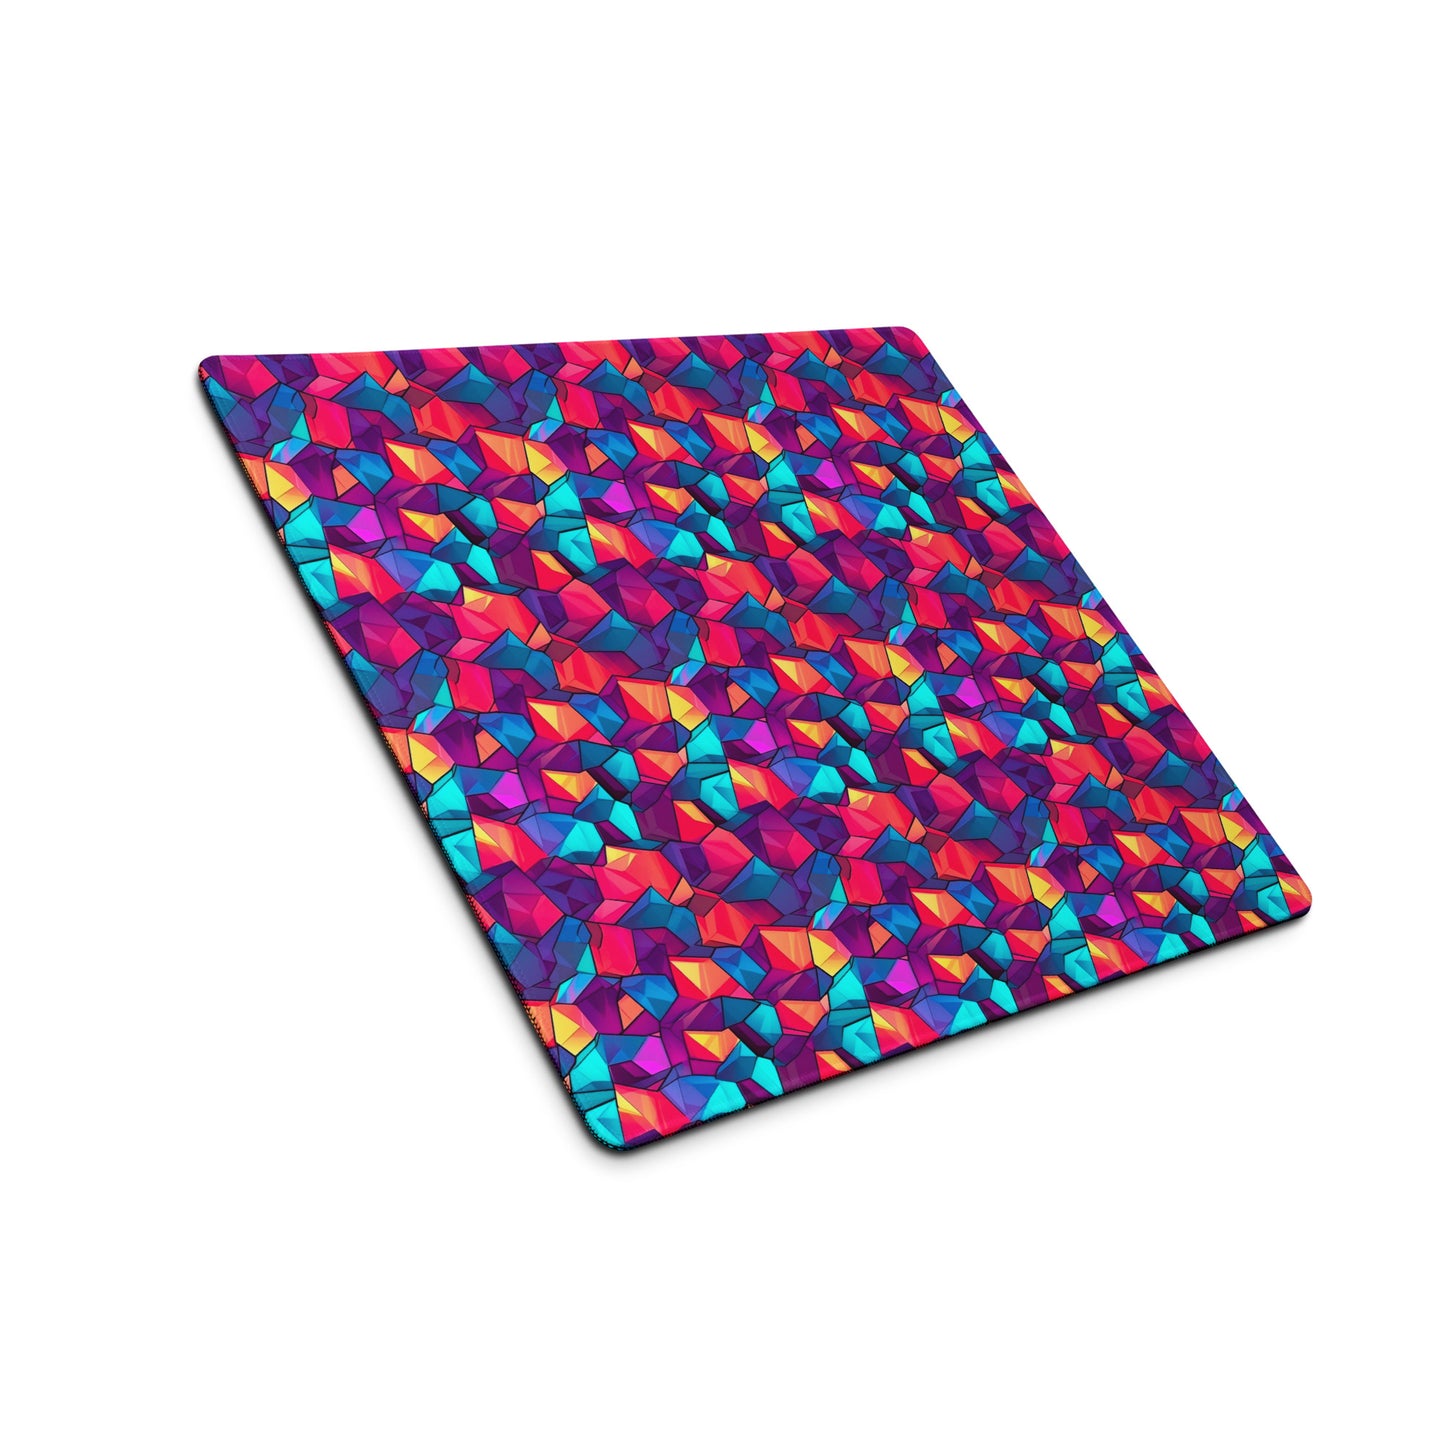 An 18" x 16" gaming desk pad with red, blue, and purple crystals sitting at an angle.